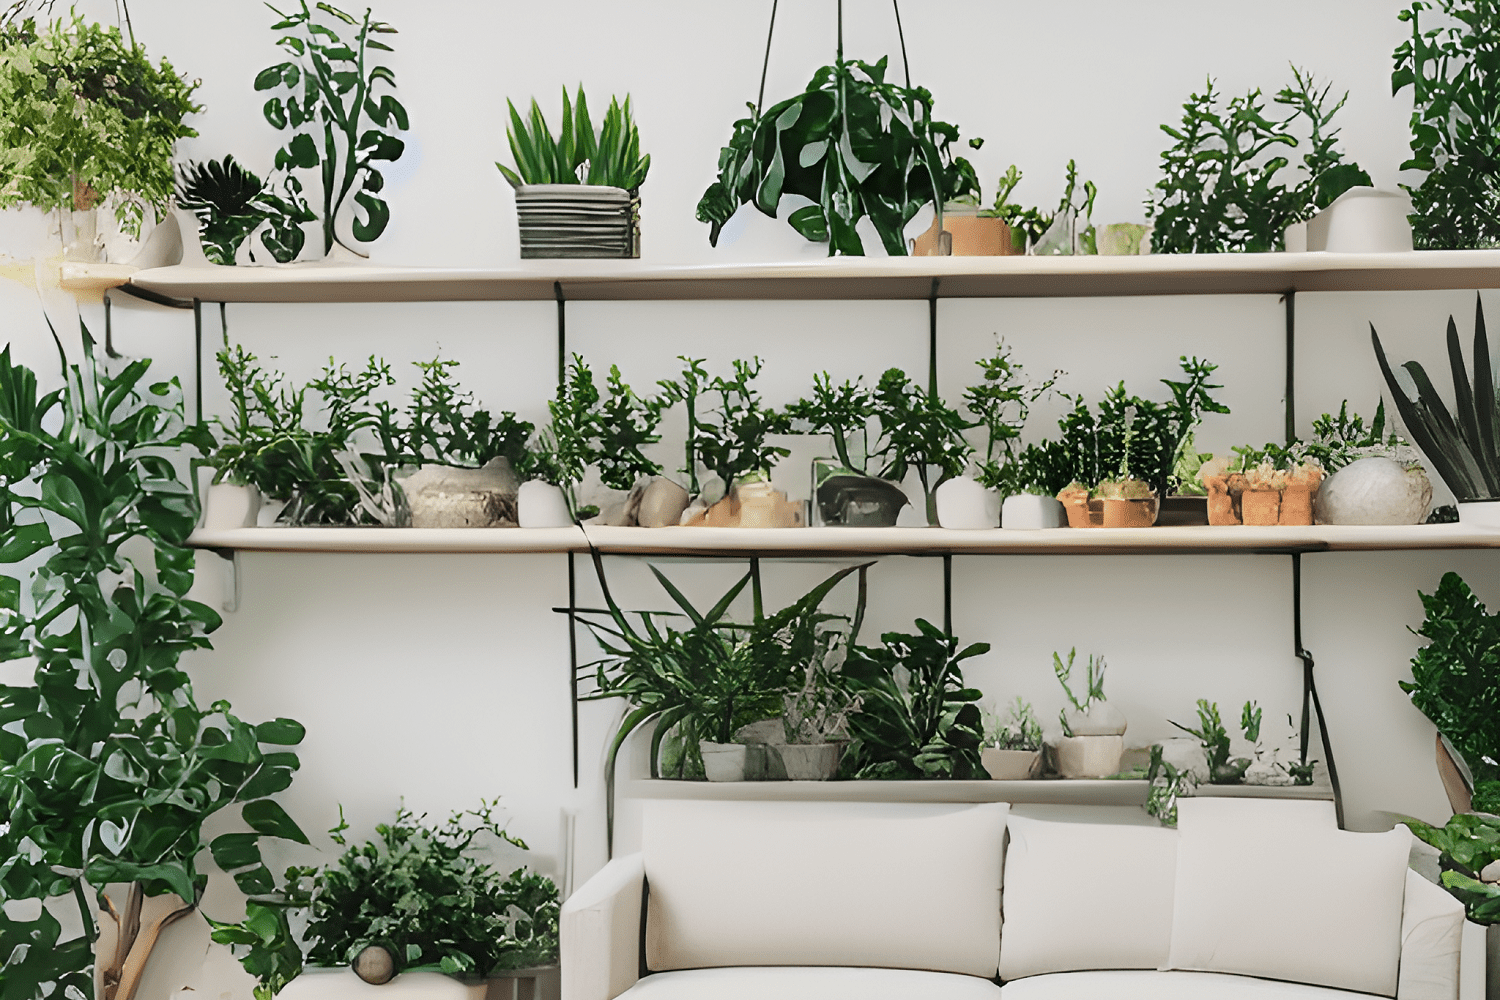 dreamy living room of succulents